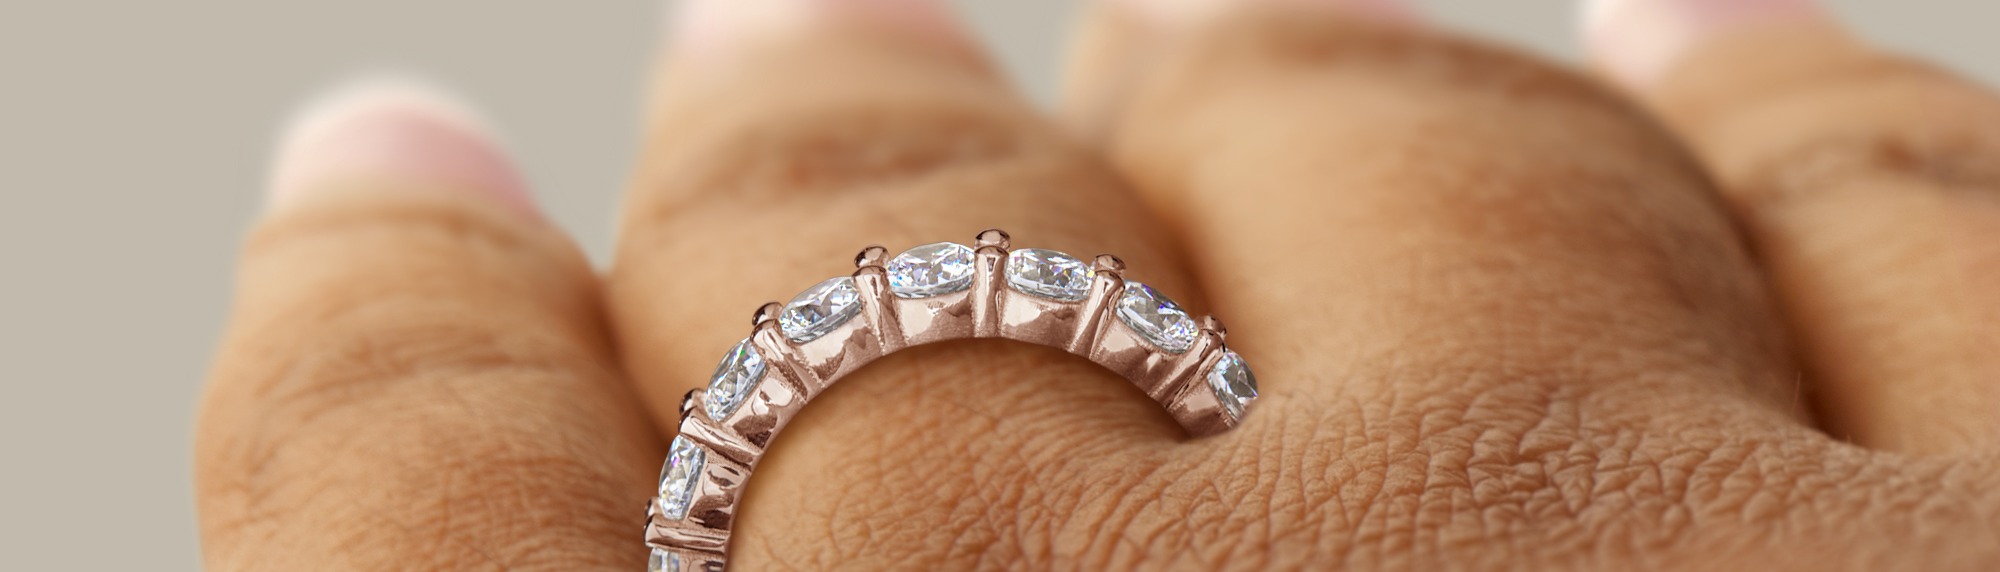 Can Wedding Bands Be Resized?